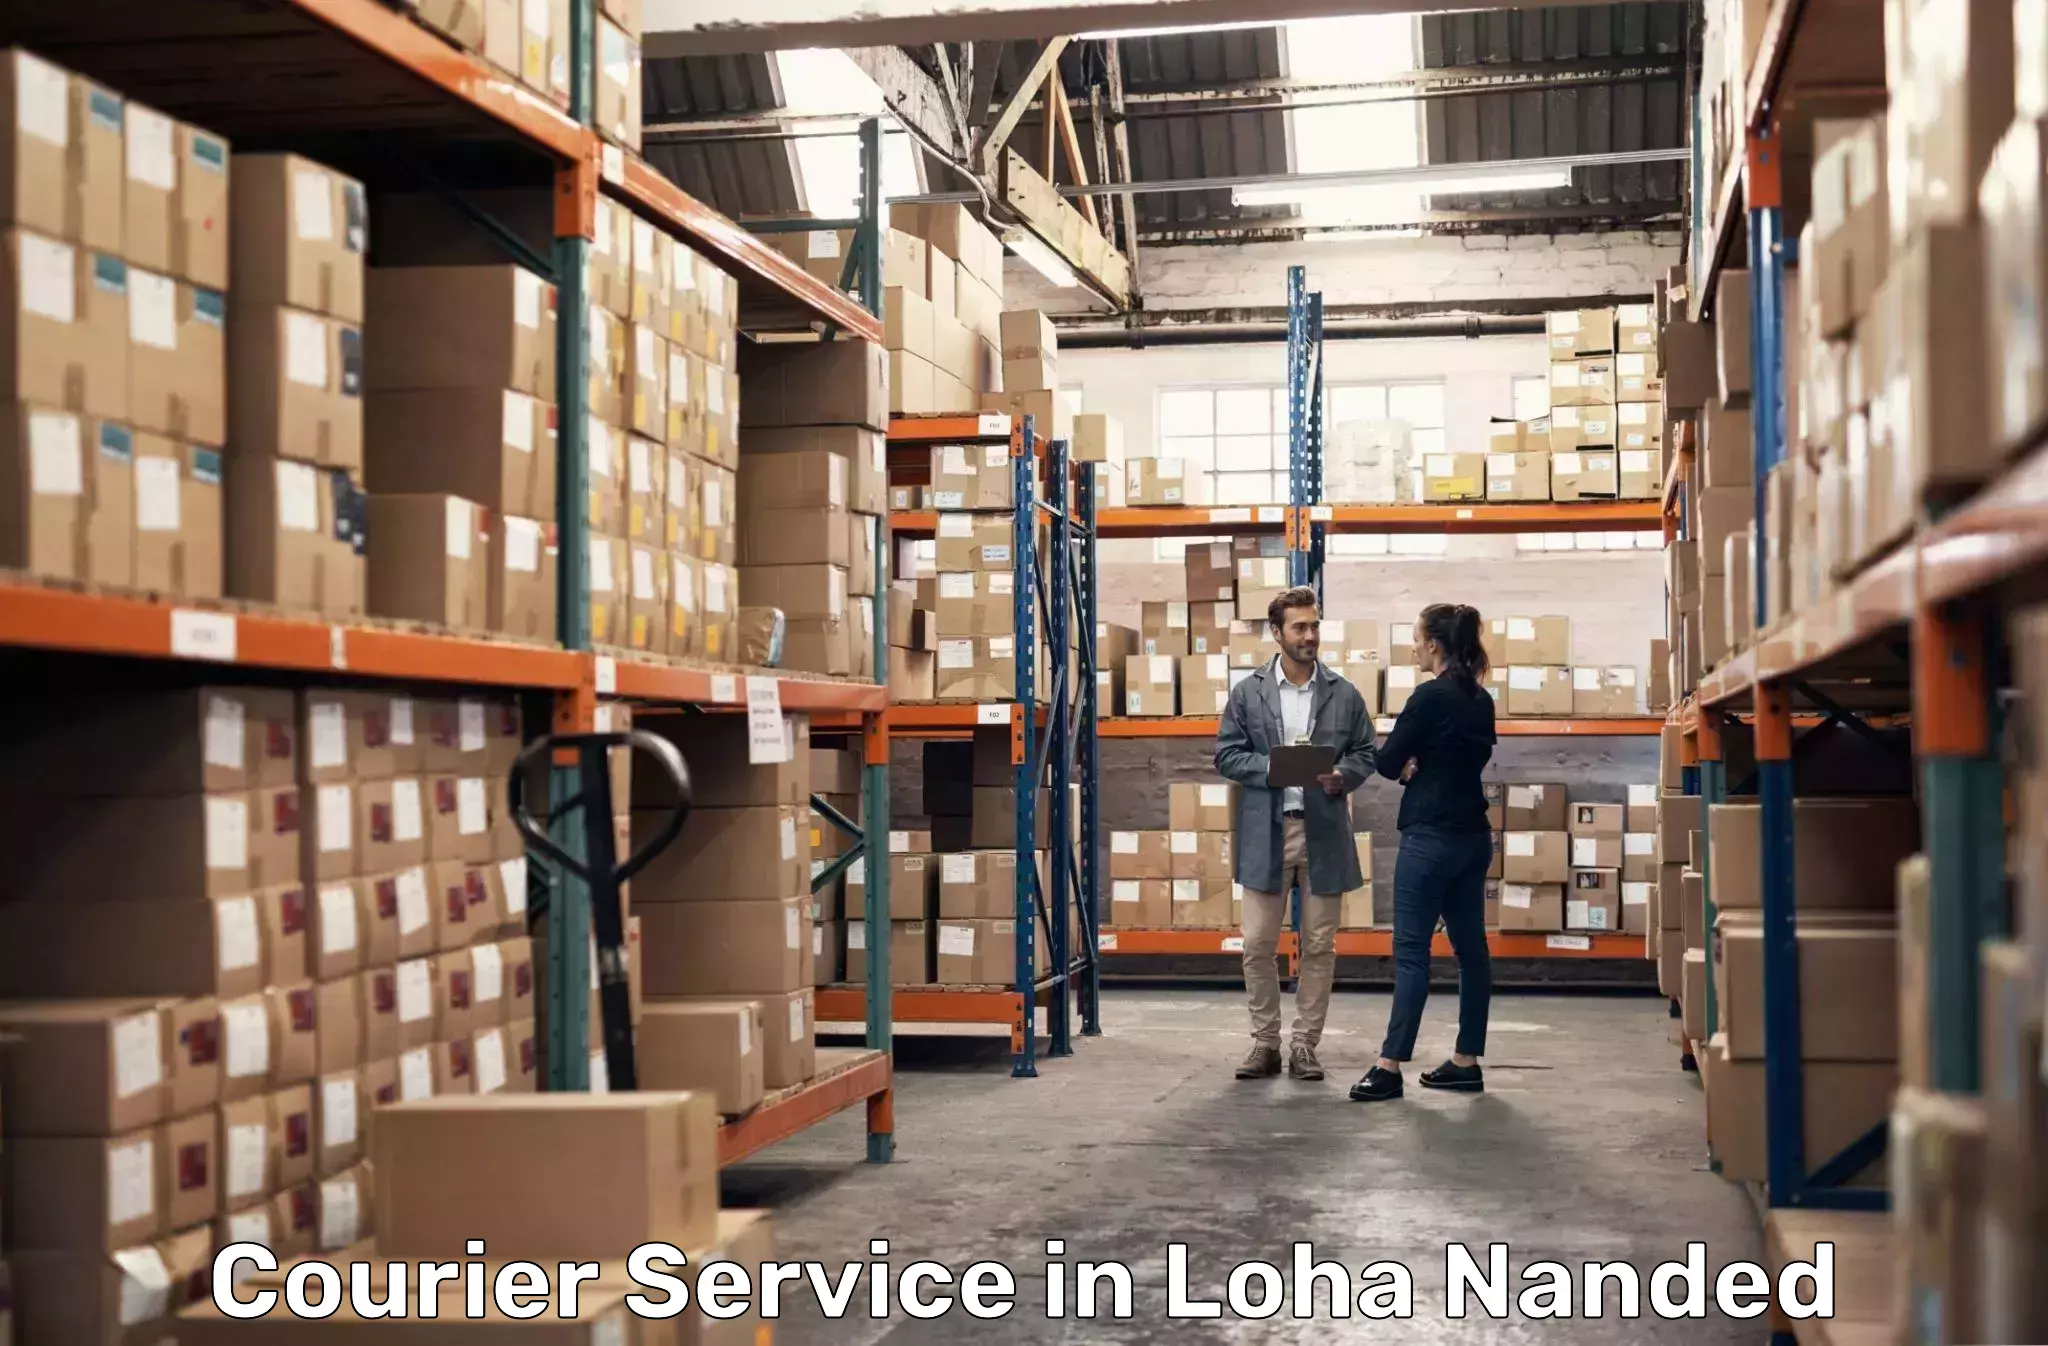 Parcel handling and care in Loha Nanded